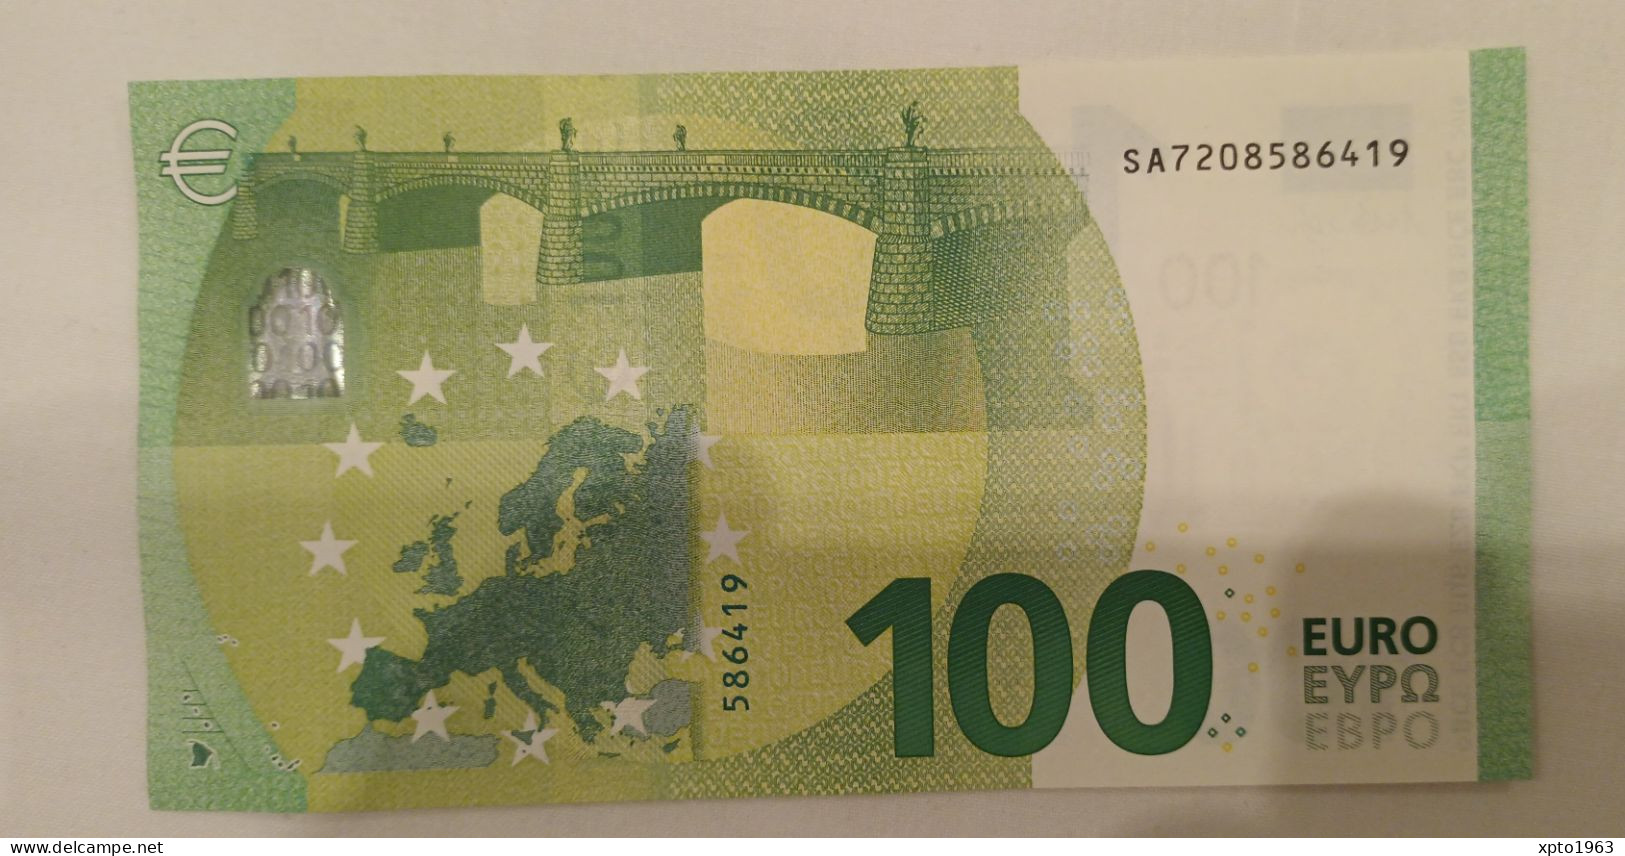 100 Euro ITALY - ITALIA S007 G5 - Serial Number SA7208586419 - UNC NEUF FDS - 100 Euro